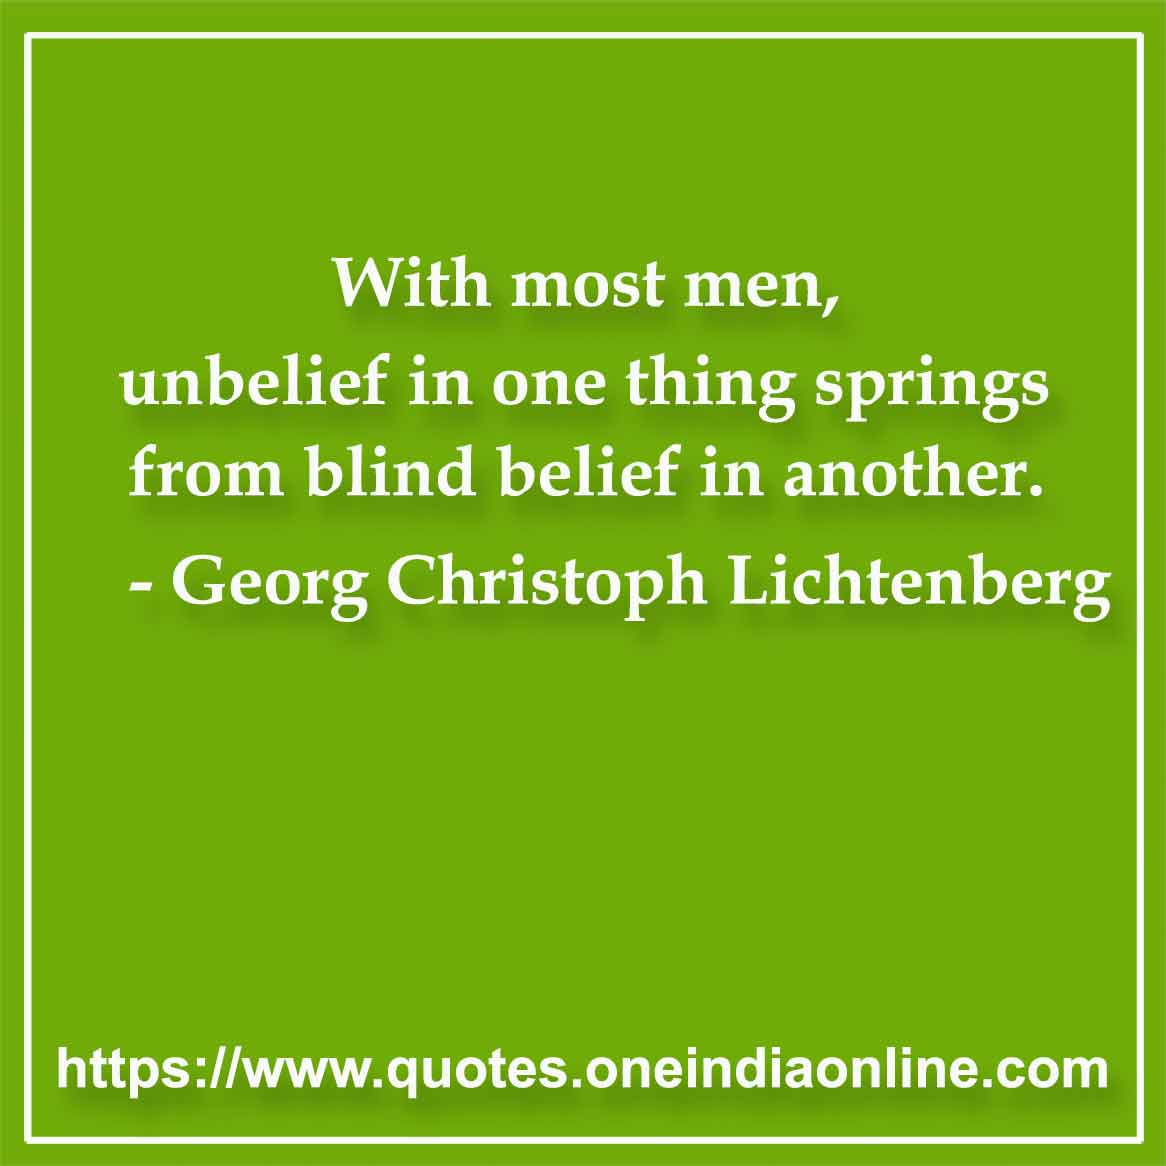 With most men, unbelief in one thing springs from blind belief in another.

- Belief Quote by Georg Christoph Lichtenberg